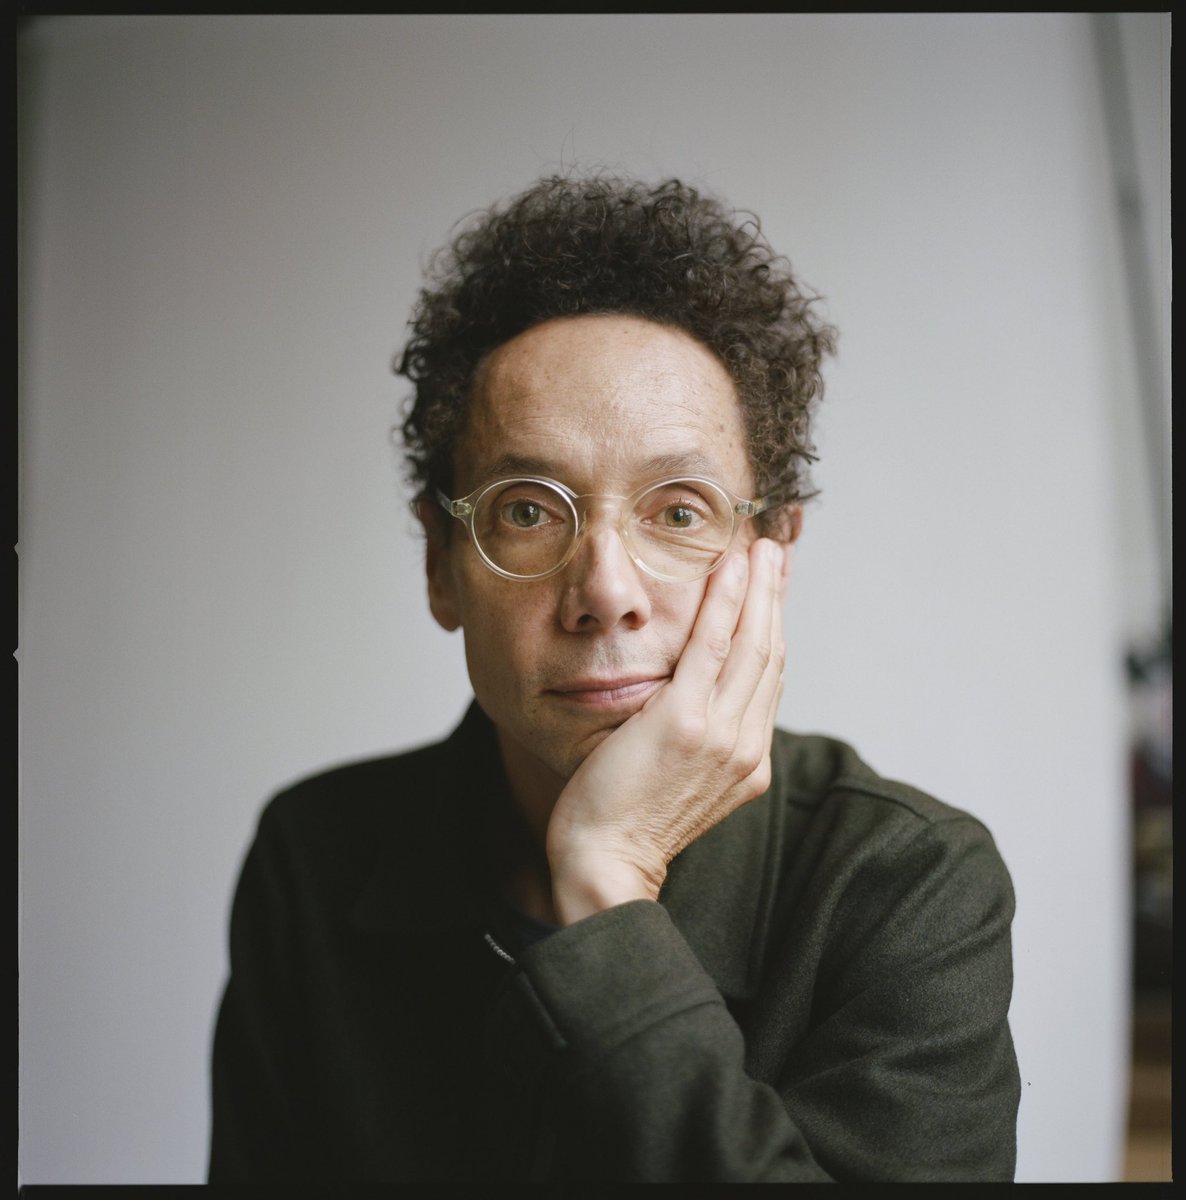 Malcolm Gladwell takes the stage today at 11am. Join us!

#DetroitAutoShow #huntingtonplacedetroit